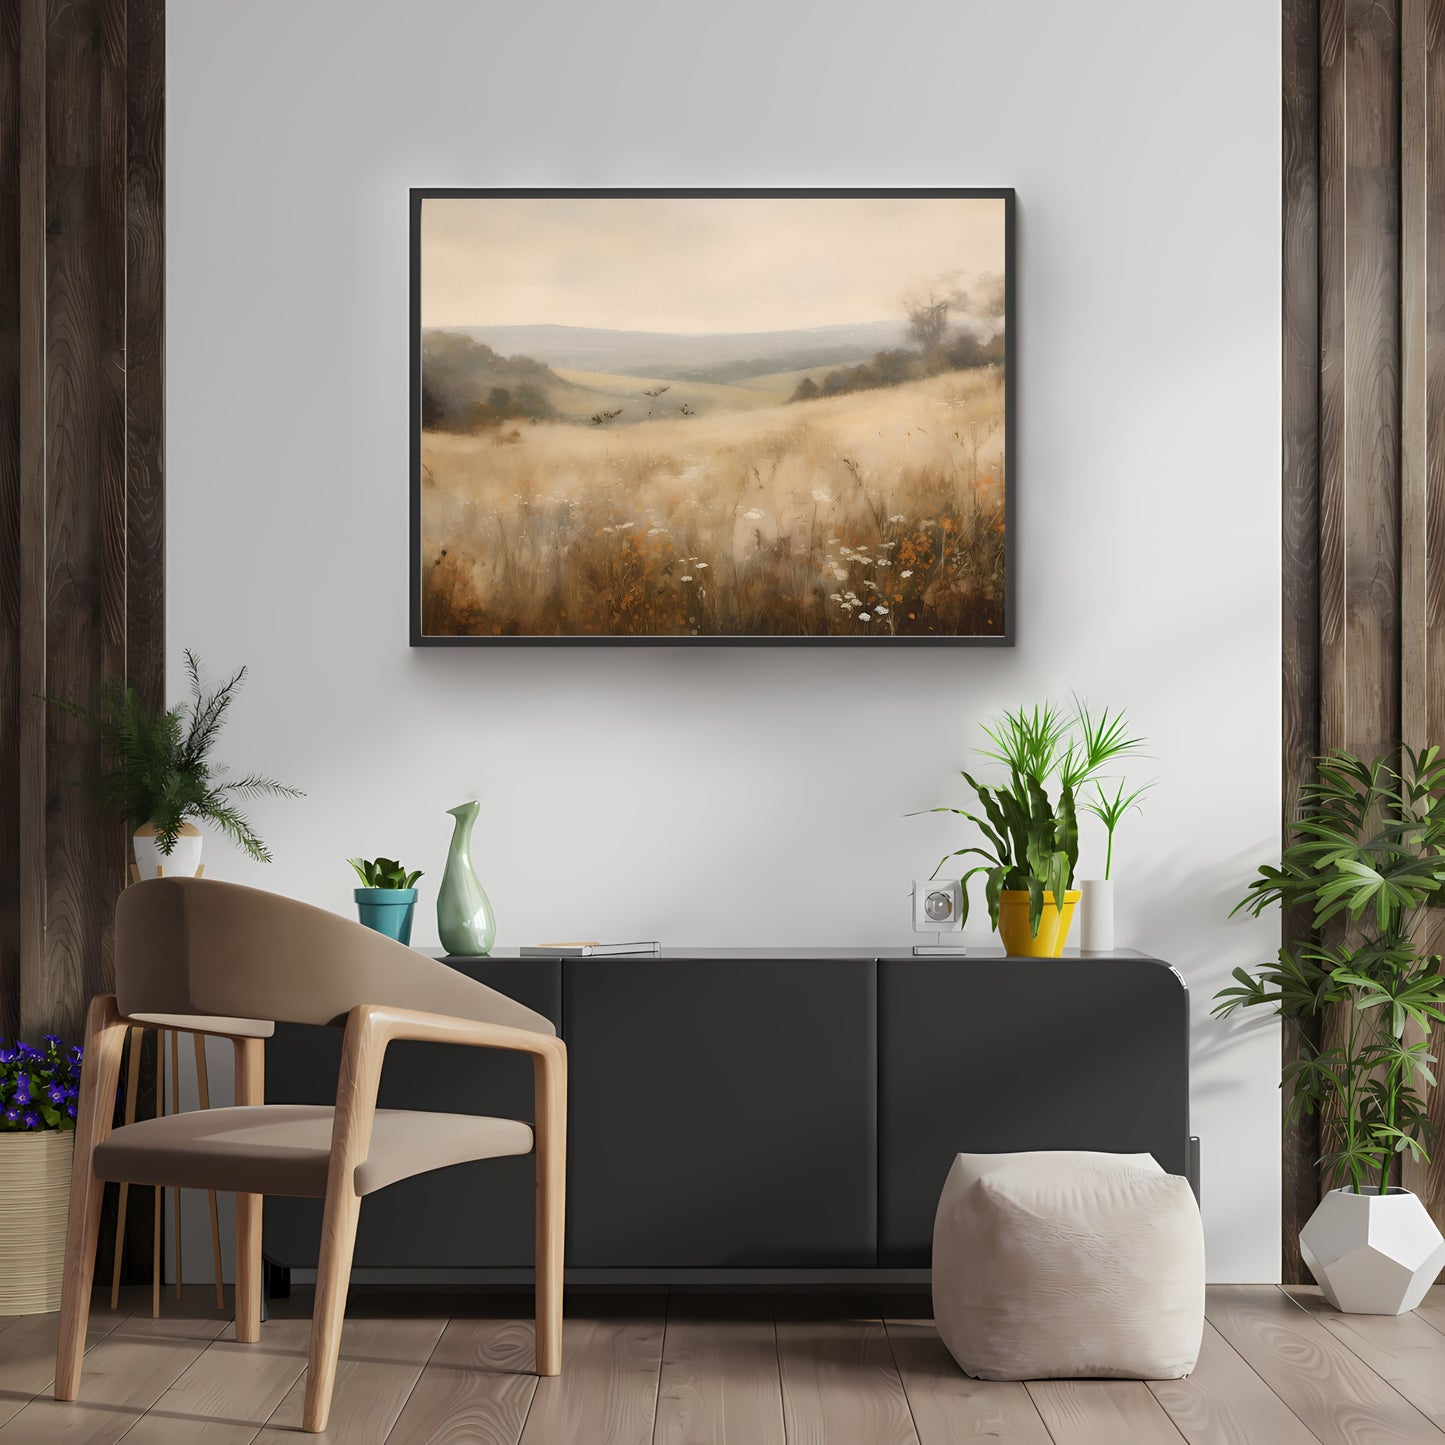 Vintage Wildflower Meadow Oil Painting Paper Poster Prints Wall Art Rural Countryside, Hazy Weather, Earth Tone Colors, Timeless Nature Home Decor